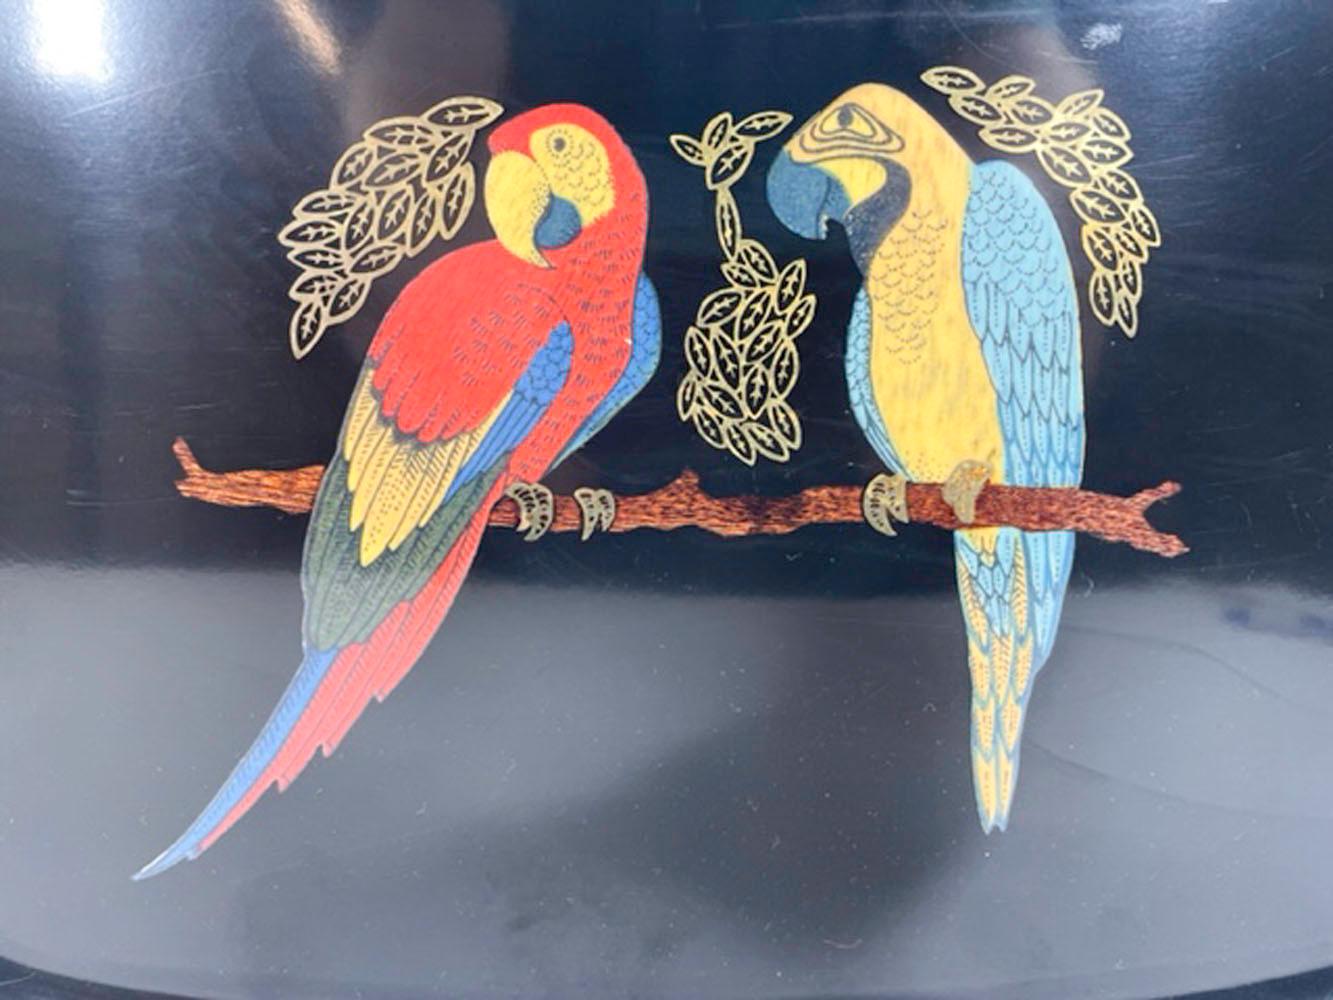 Vintage Couroc Phenolic Resin Serving Tray, Stained Wood and Brass Inlaid Macaws In Good Condition For Sale In Nantucket, MA